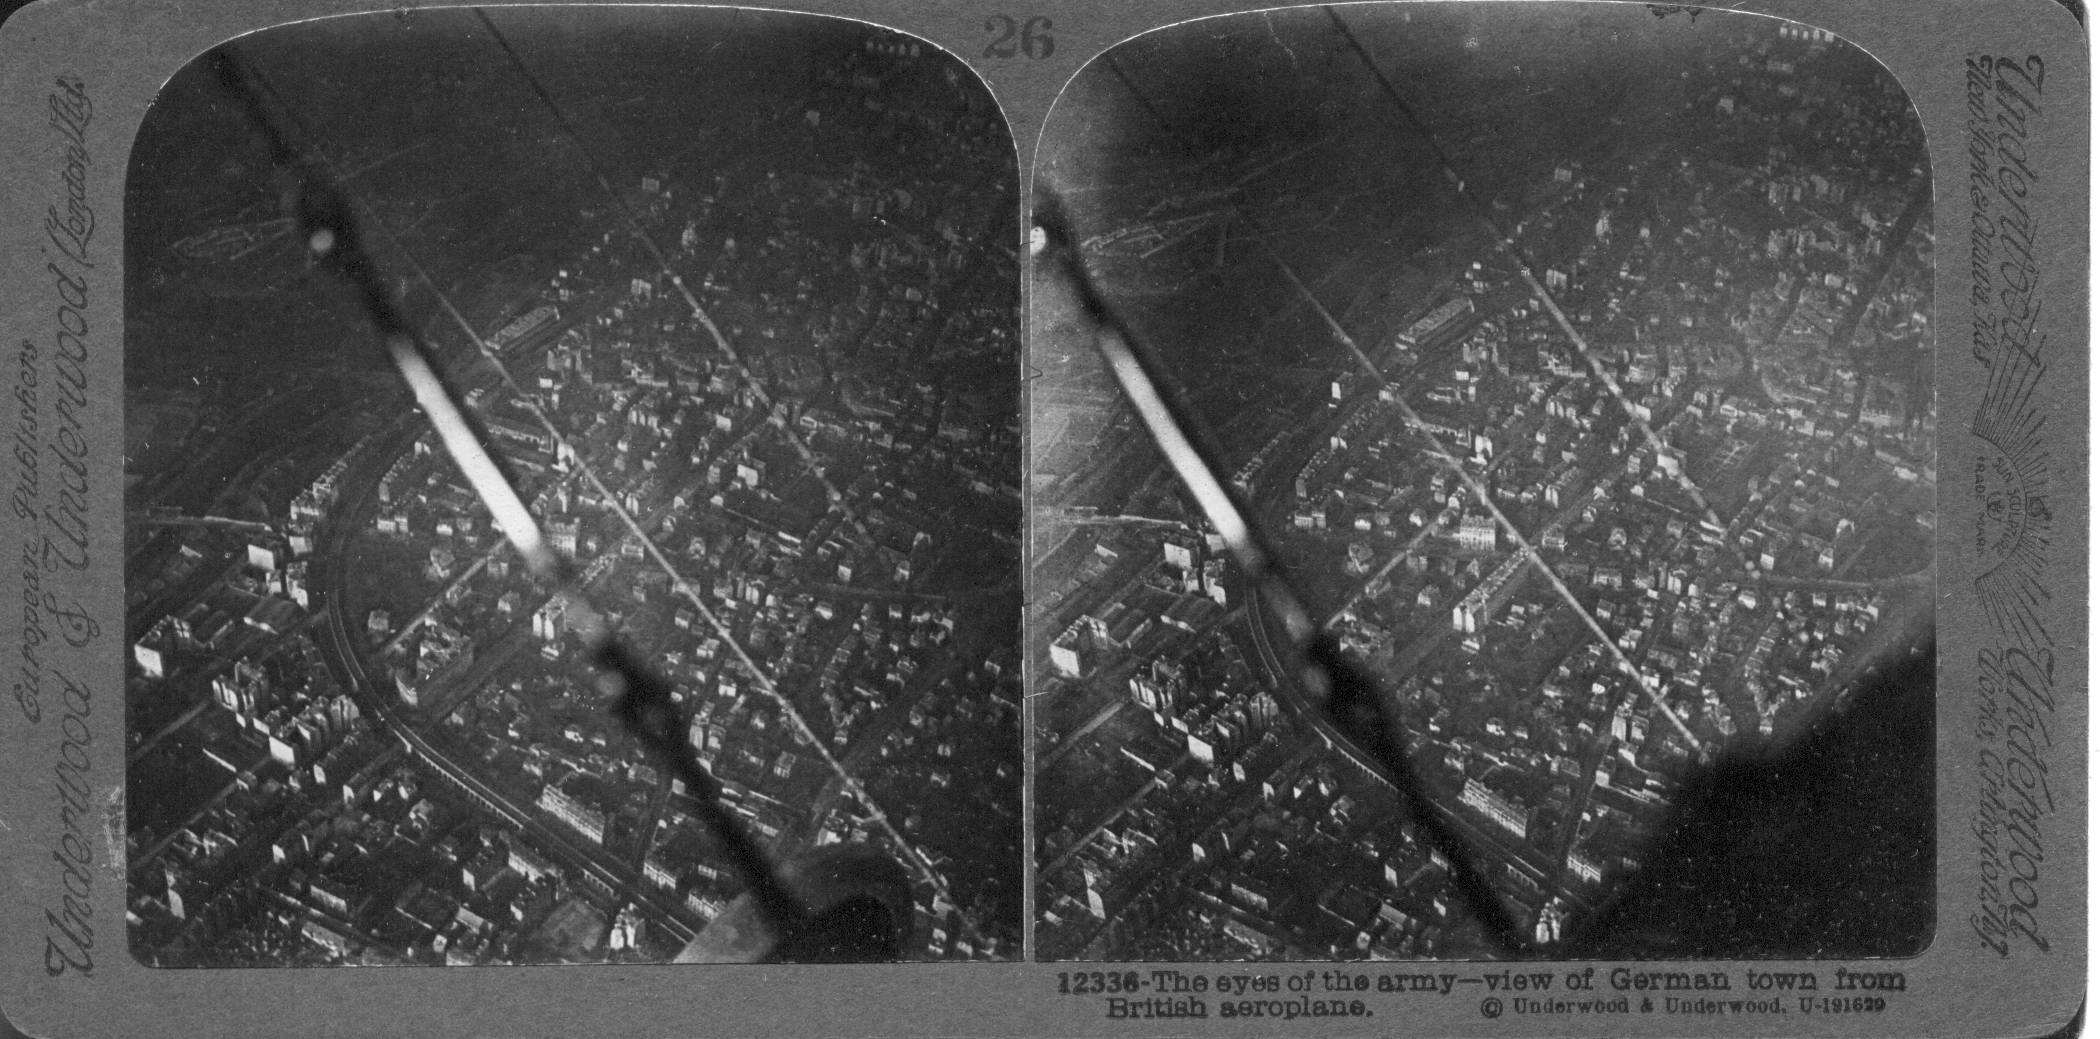 The eyes of the army--view of German town from British aeroplane